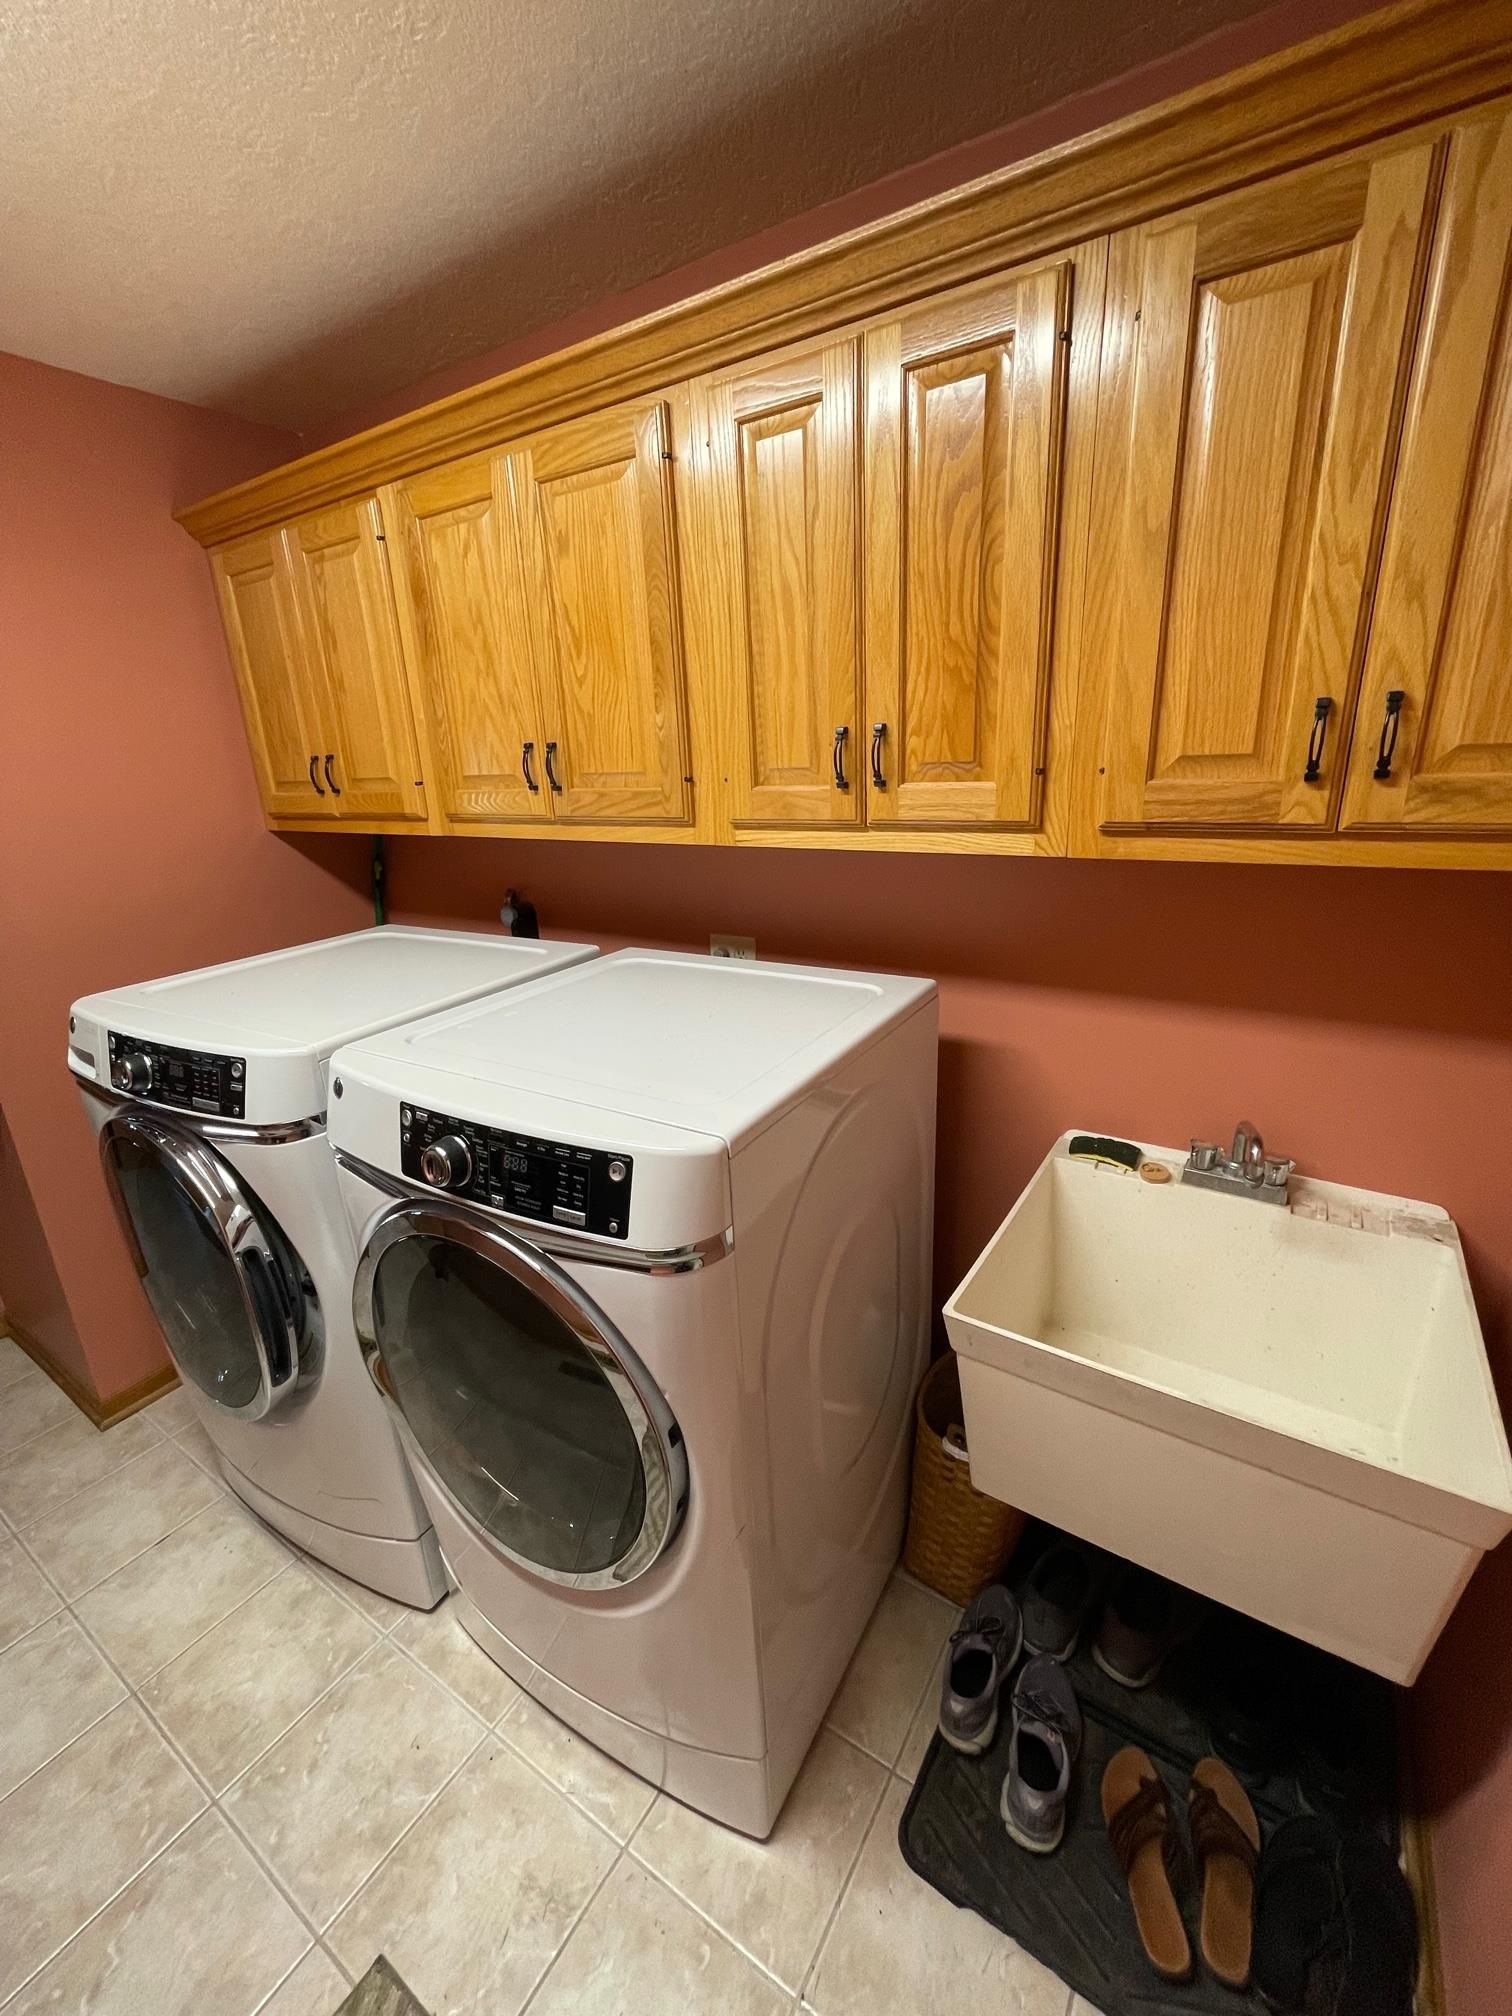 Huge main floor Laundry Room with sink and cabinets!